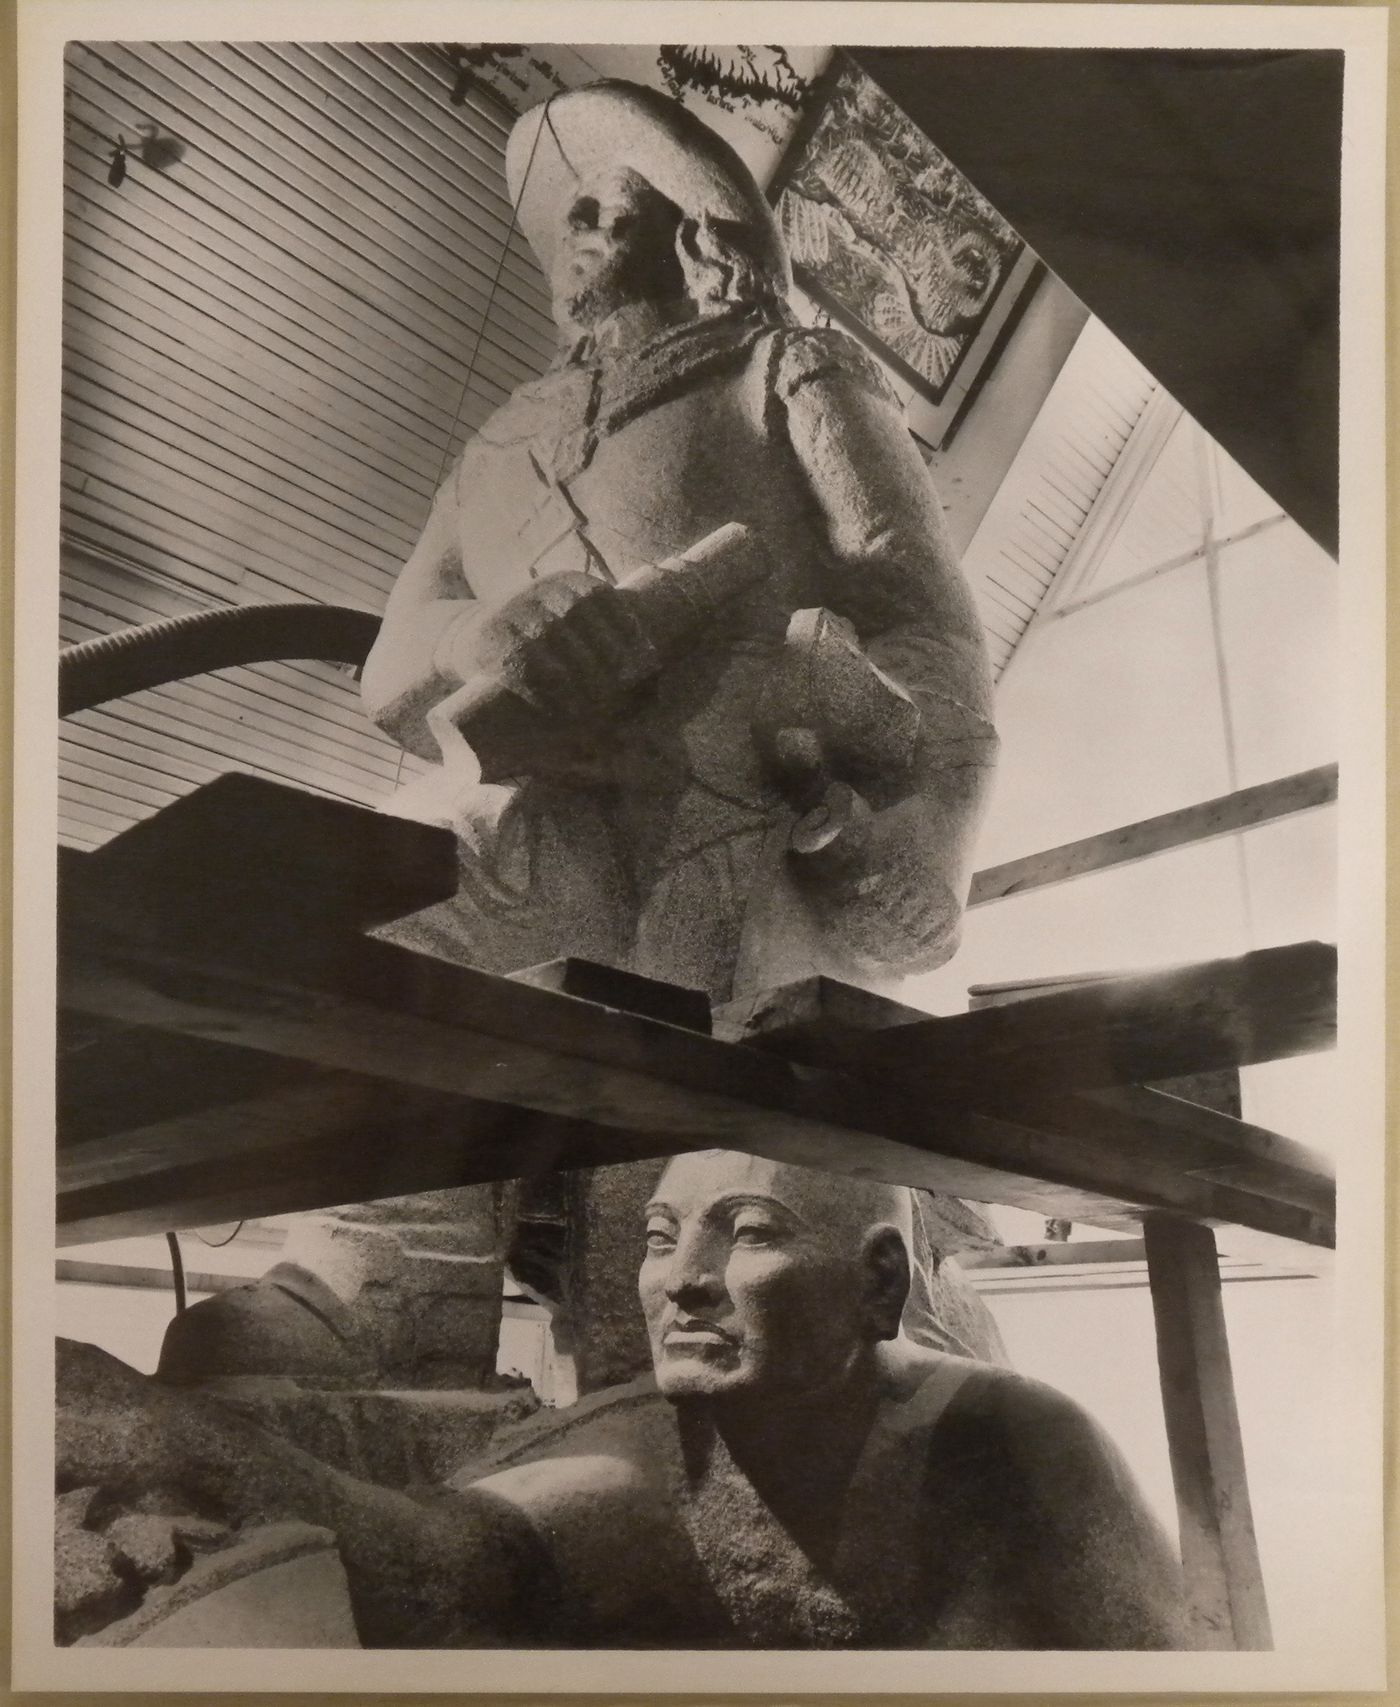 View of  the statue of Samuel de Champlain sculpted by Ferdinand L. Weber at the Vermont Pavilion, Expo 67, Montreal, Quebec